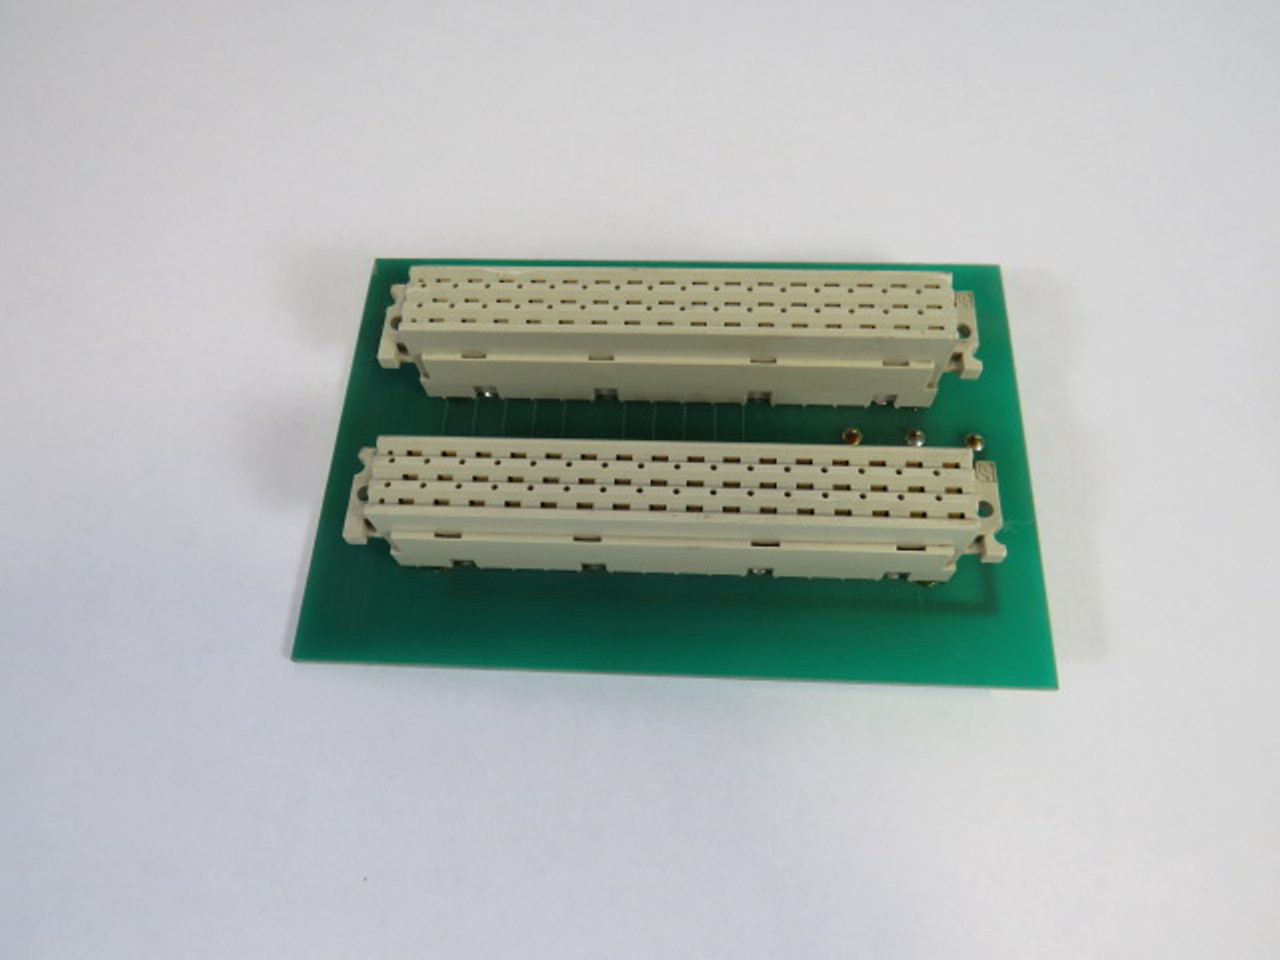 OCM M2002-P-8 Rev 2.0 Connector Board 48-Pin USED